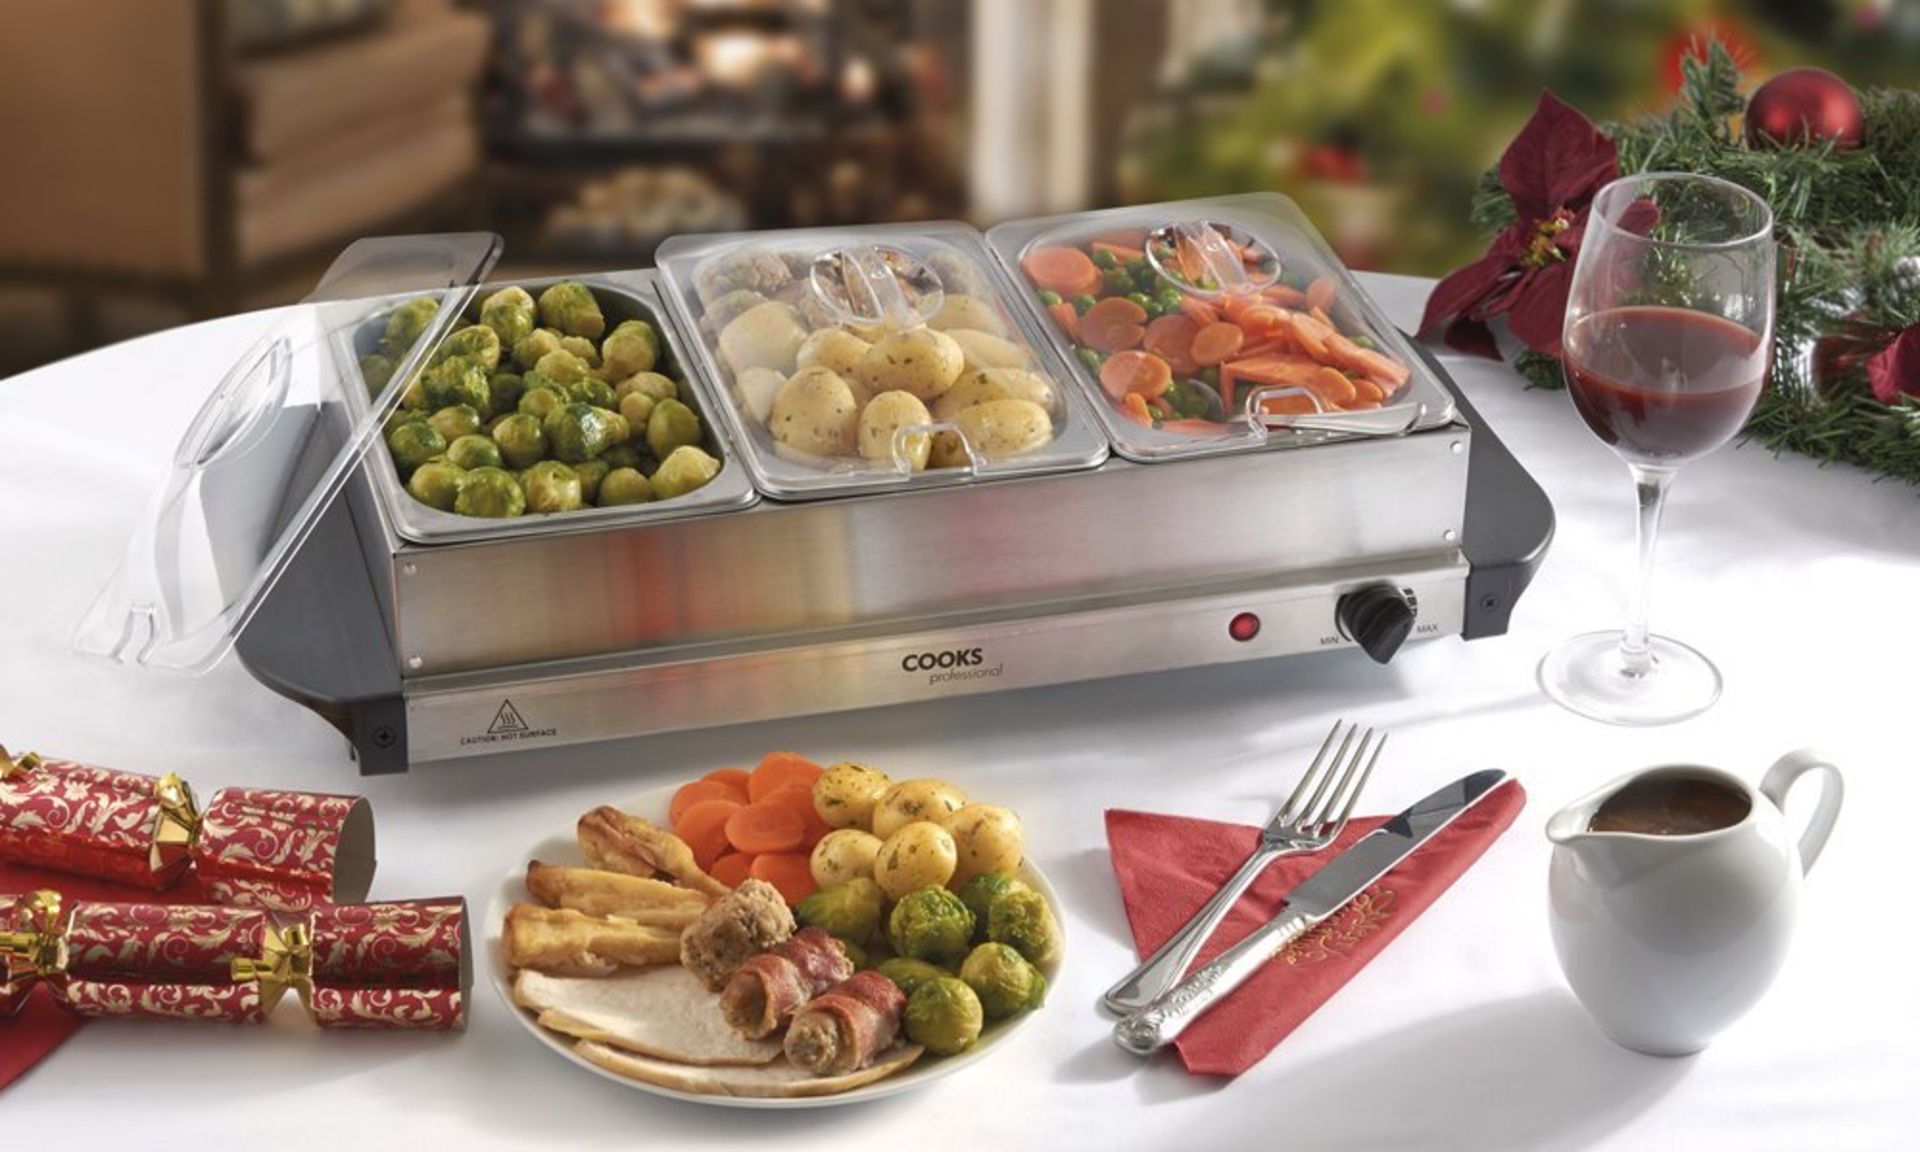 Cooks Professional 3 Section Buffet Warmer Hotplate BBQ Christmas Event Warming Hostess Tray with - Image 2 of 3